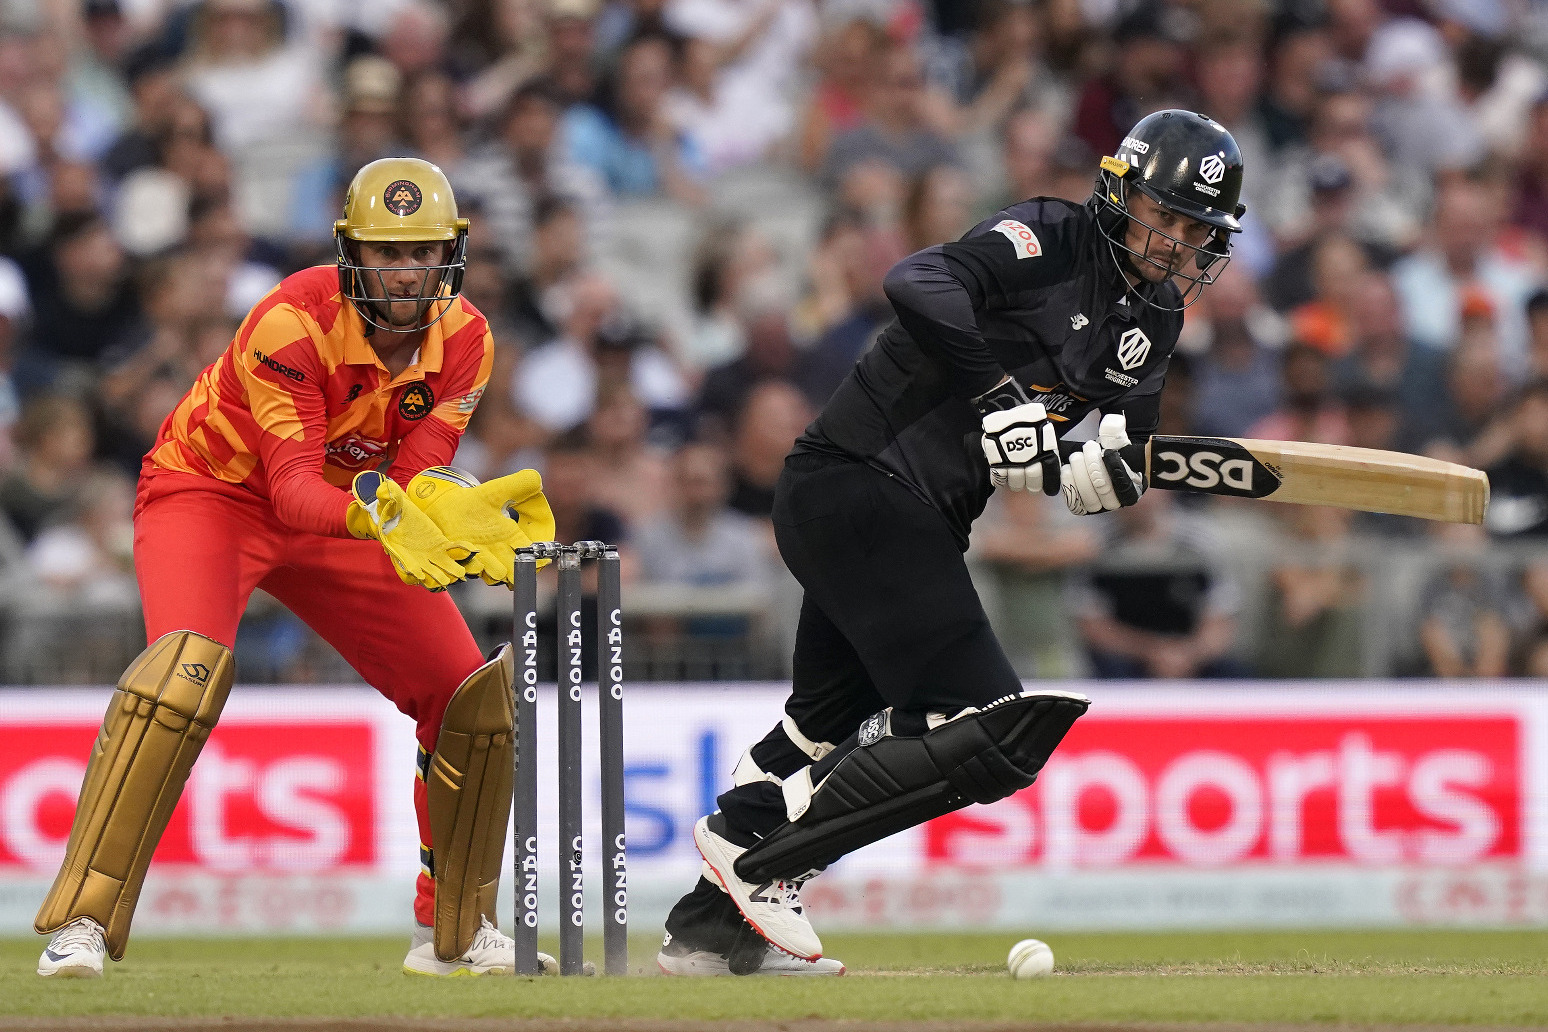 New Zealand’s Colin Munro joins Worcestershire for Vitality Blast 